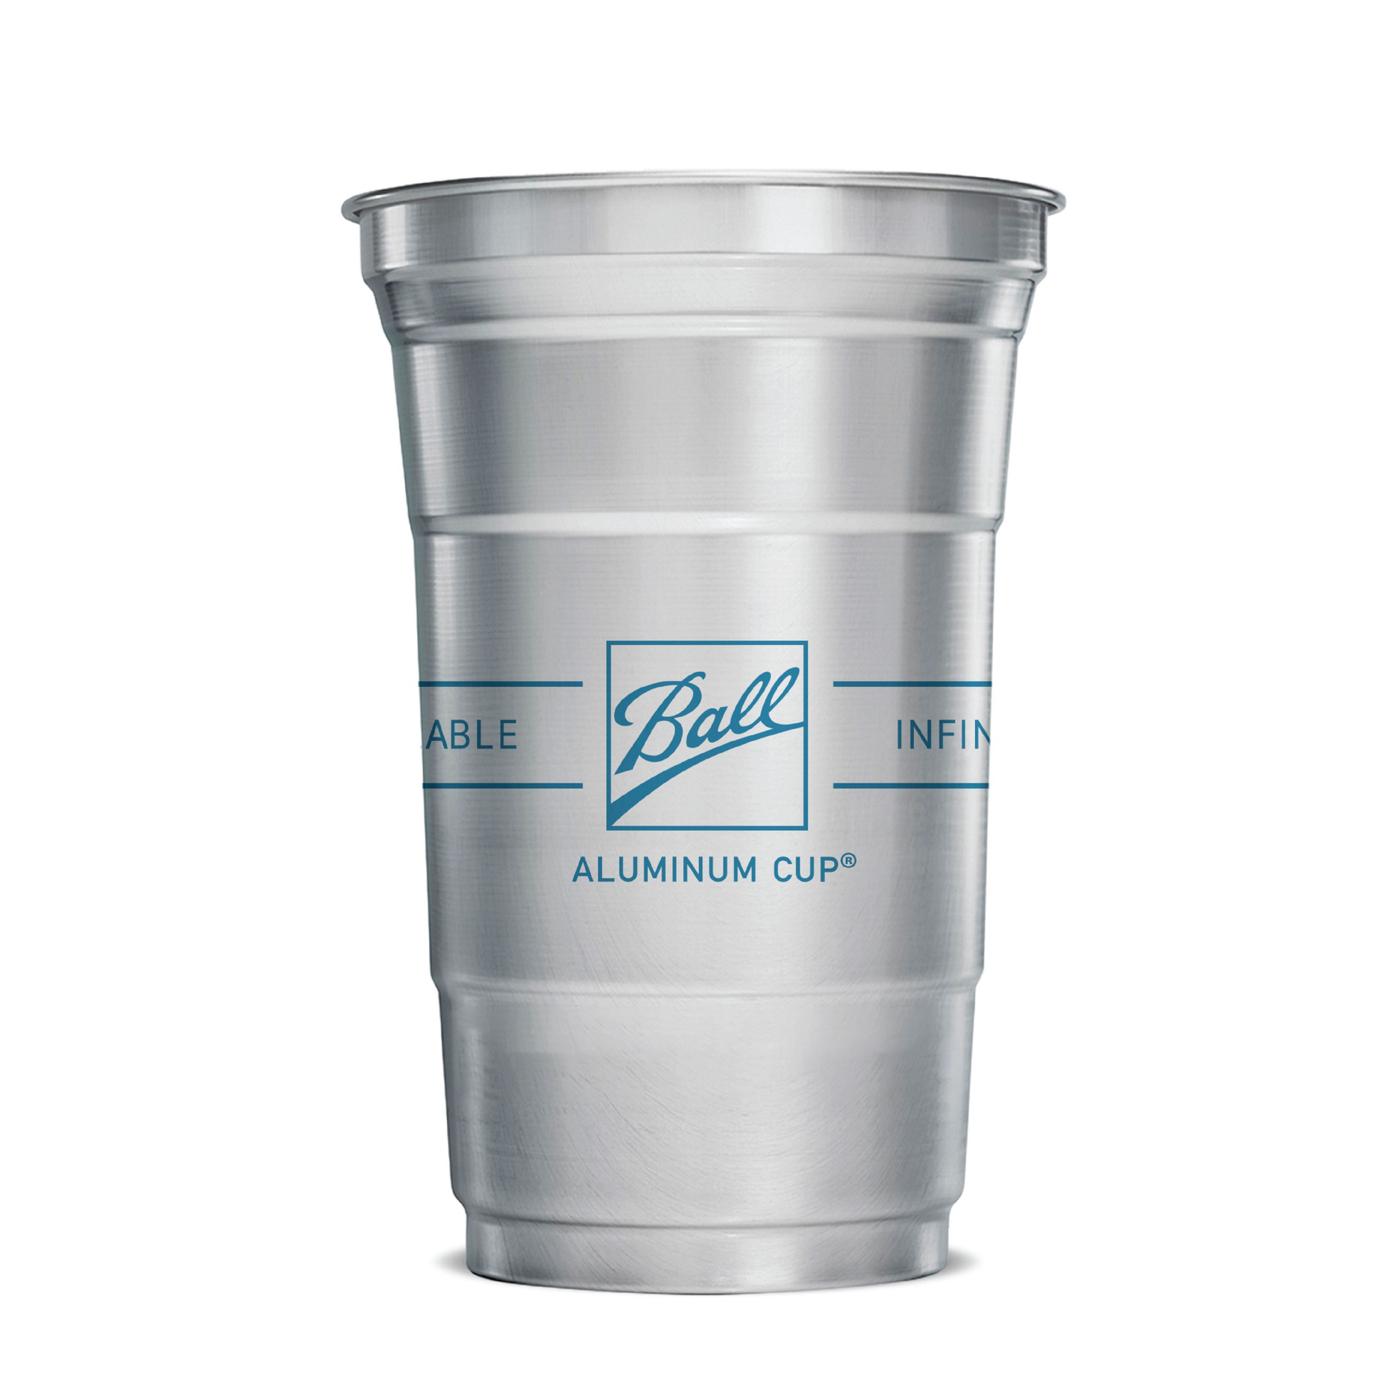 Ball Aluminum Cup Recyclable Party Cups, 20 oz. Cup, 10 Cups Per